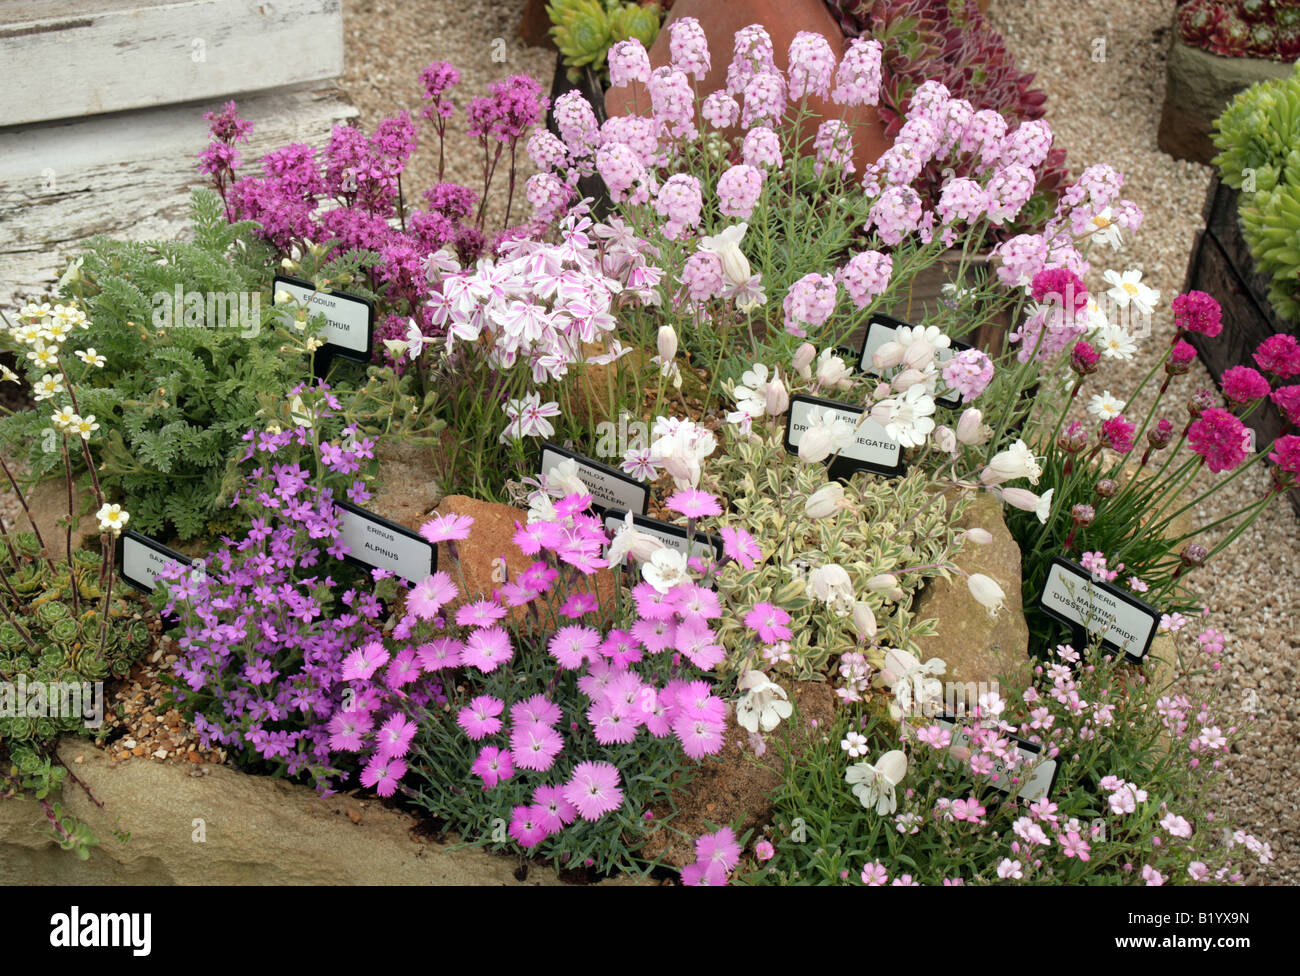 Trough planted with alpine plants Chelsea Flower Show 2008 Stock Photo